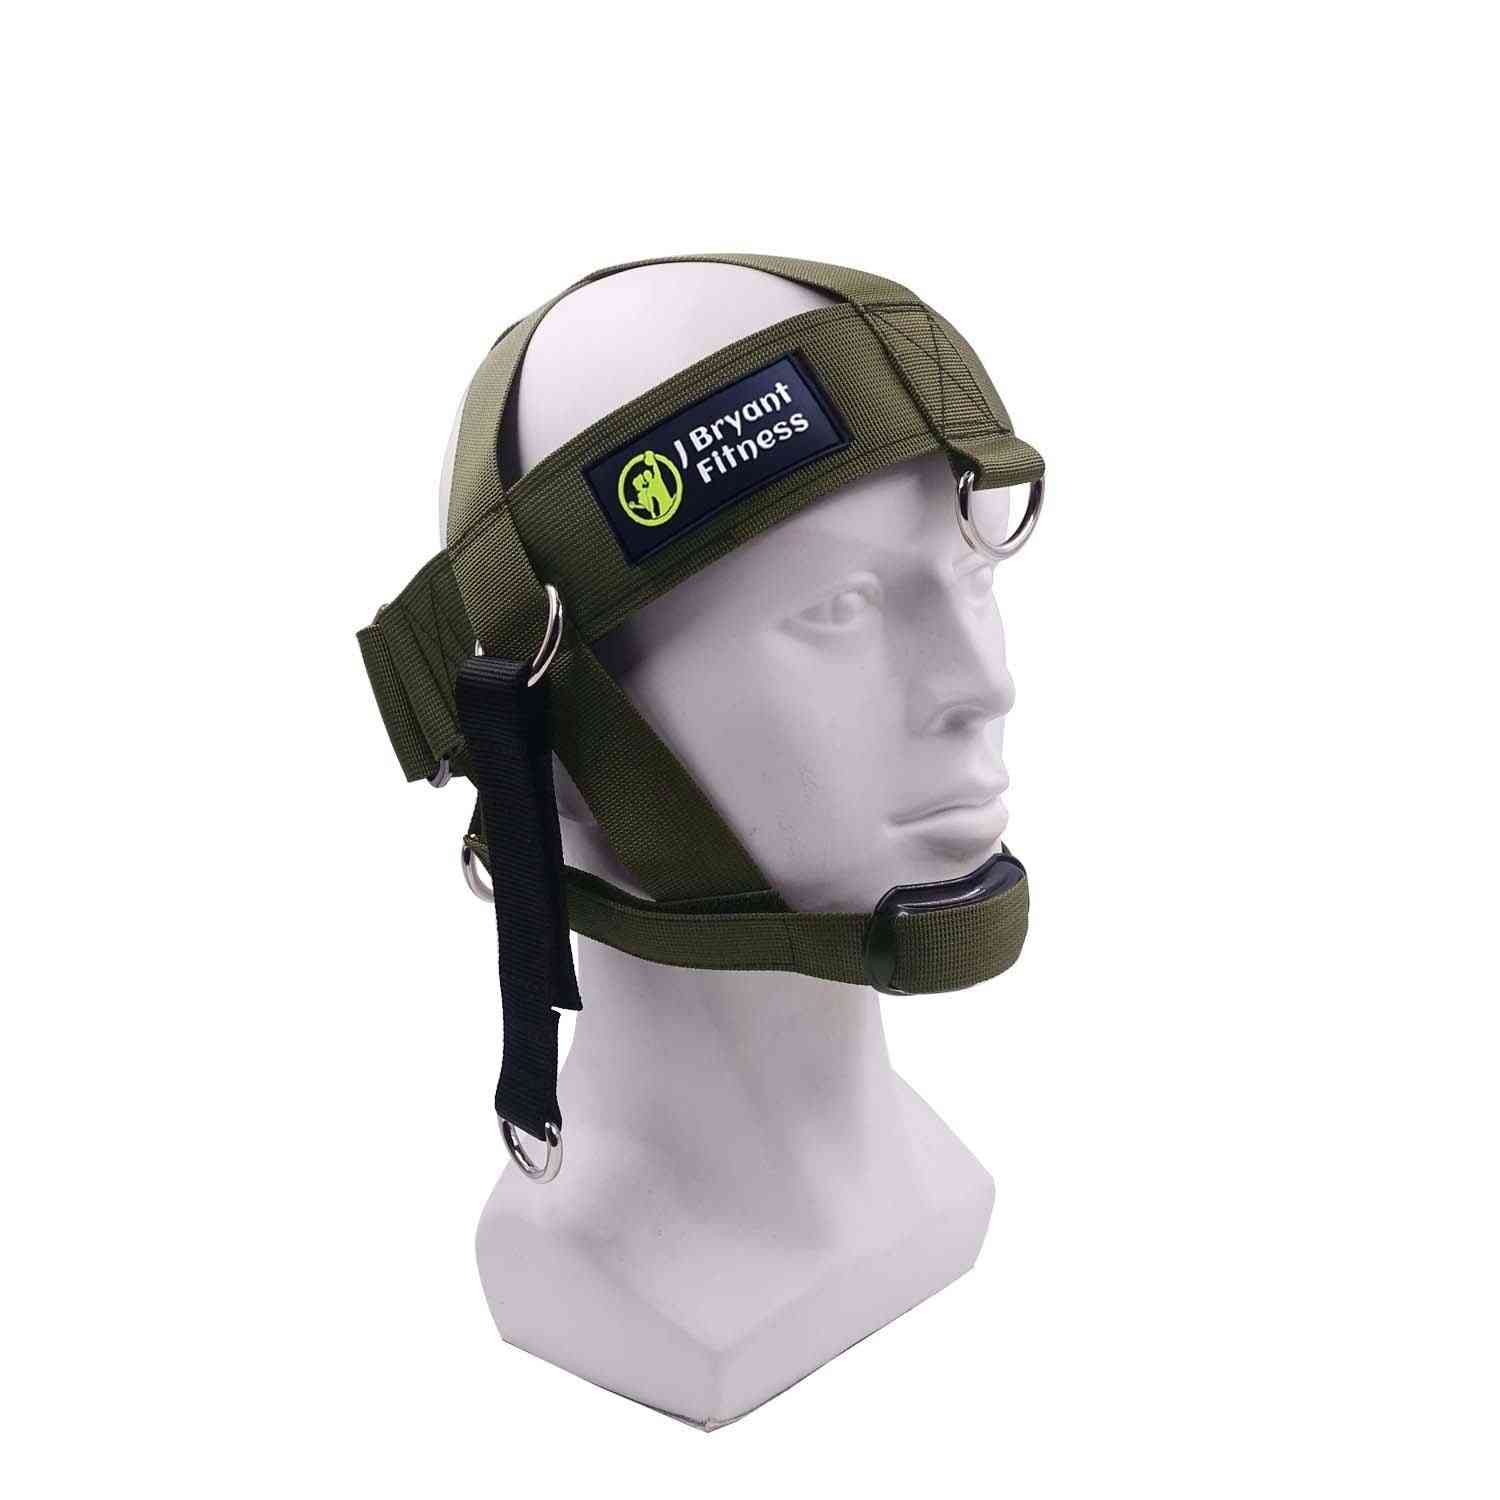 Head Neck Harness For Weight Lifting Training Diverse